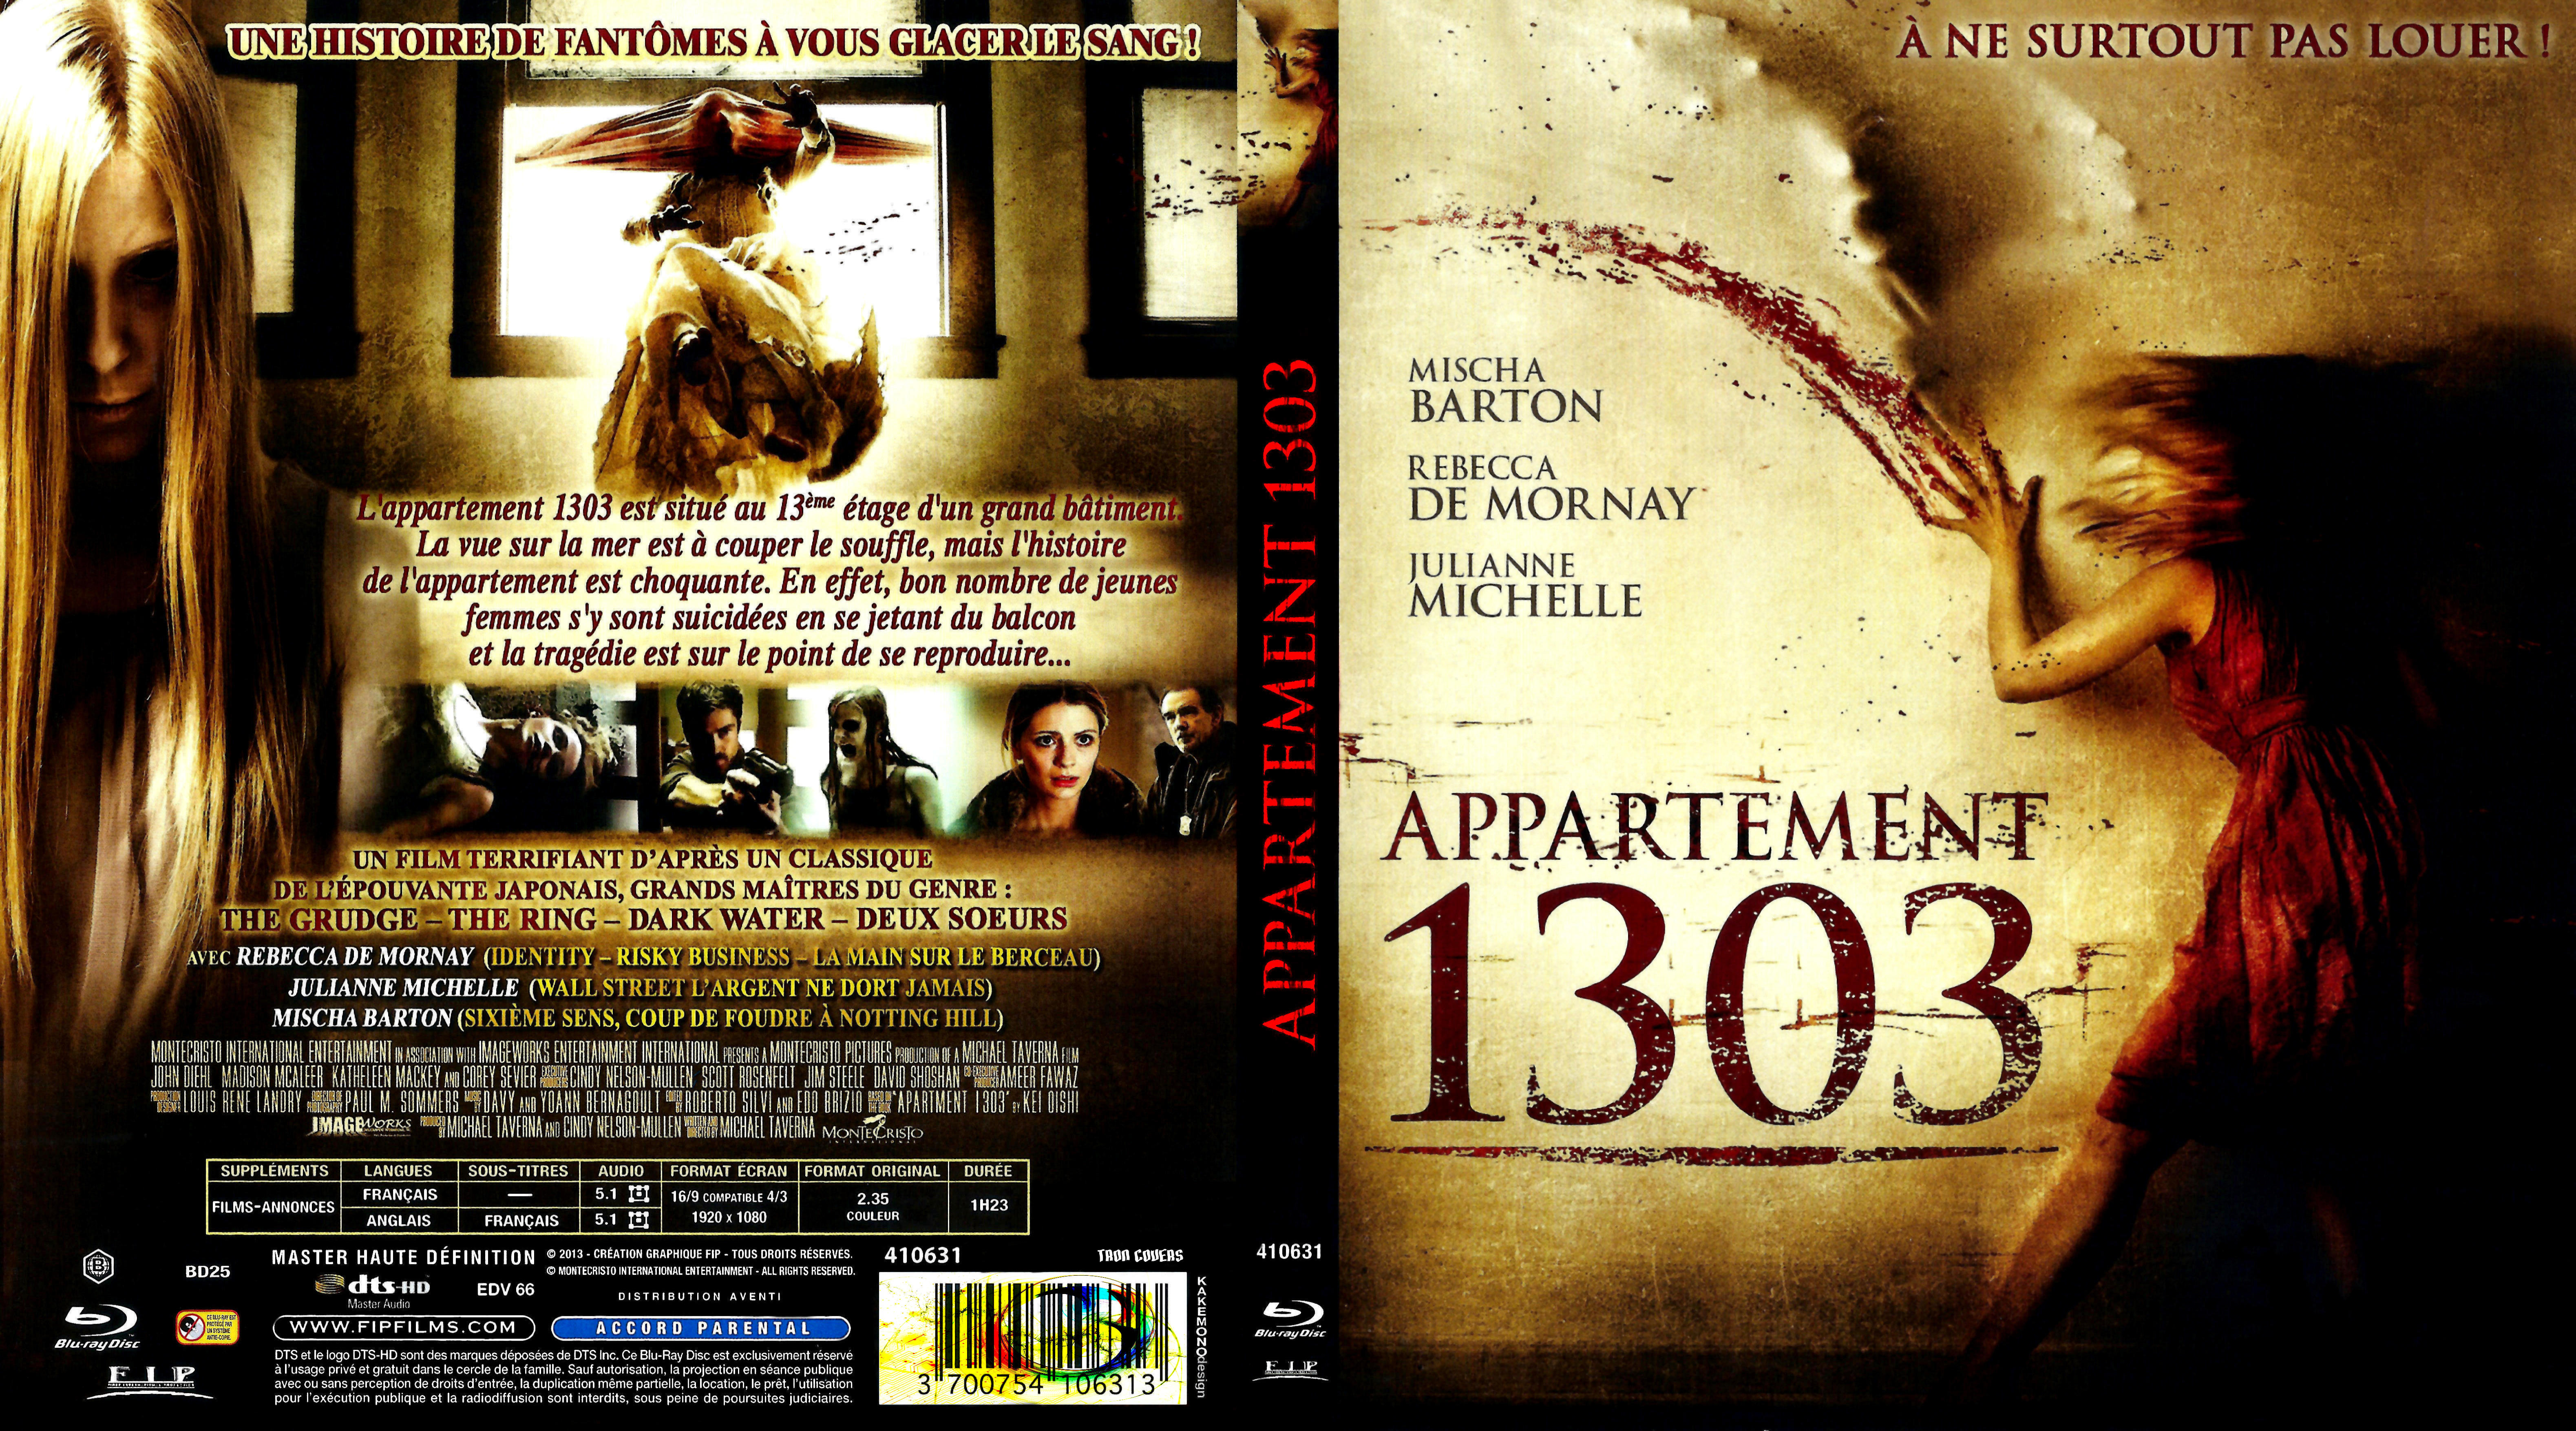 Jaquette DVD Appartement 1303 (BLU-RAY)